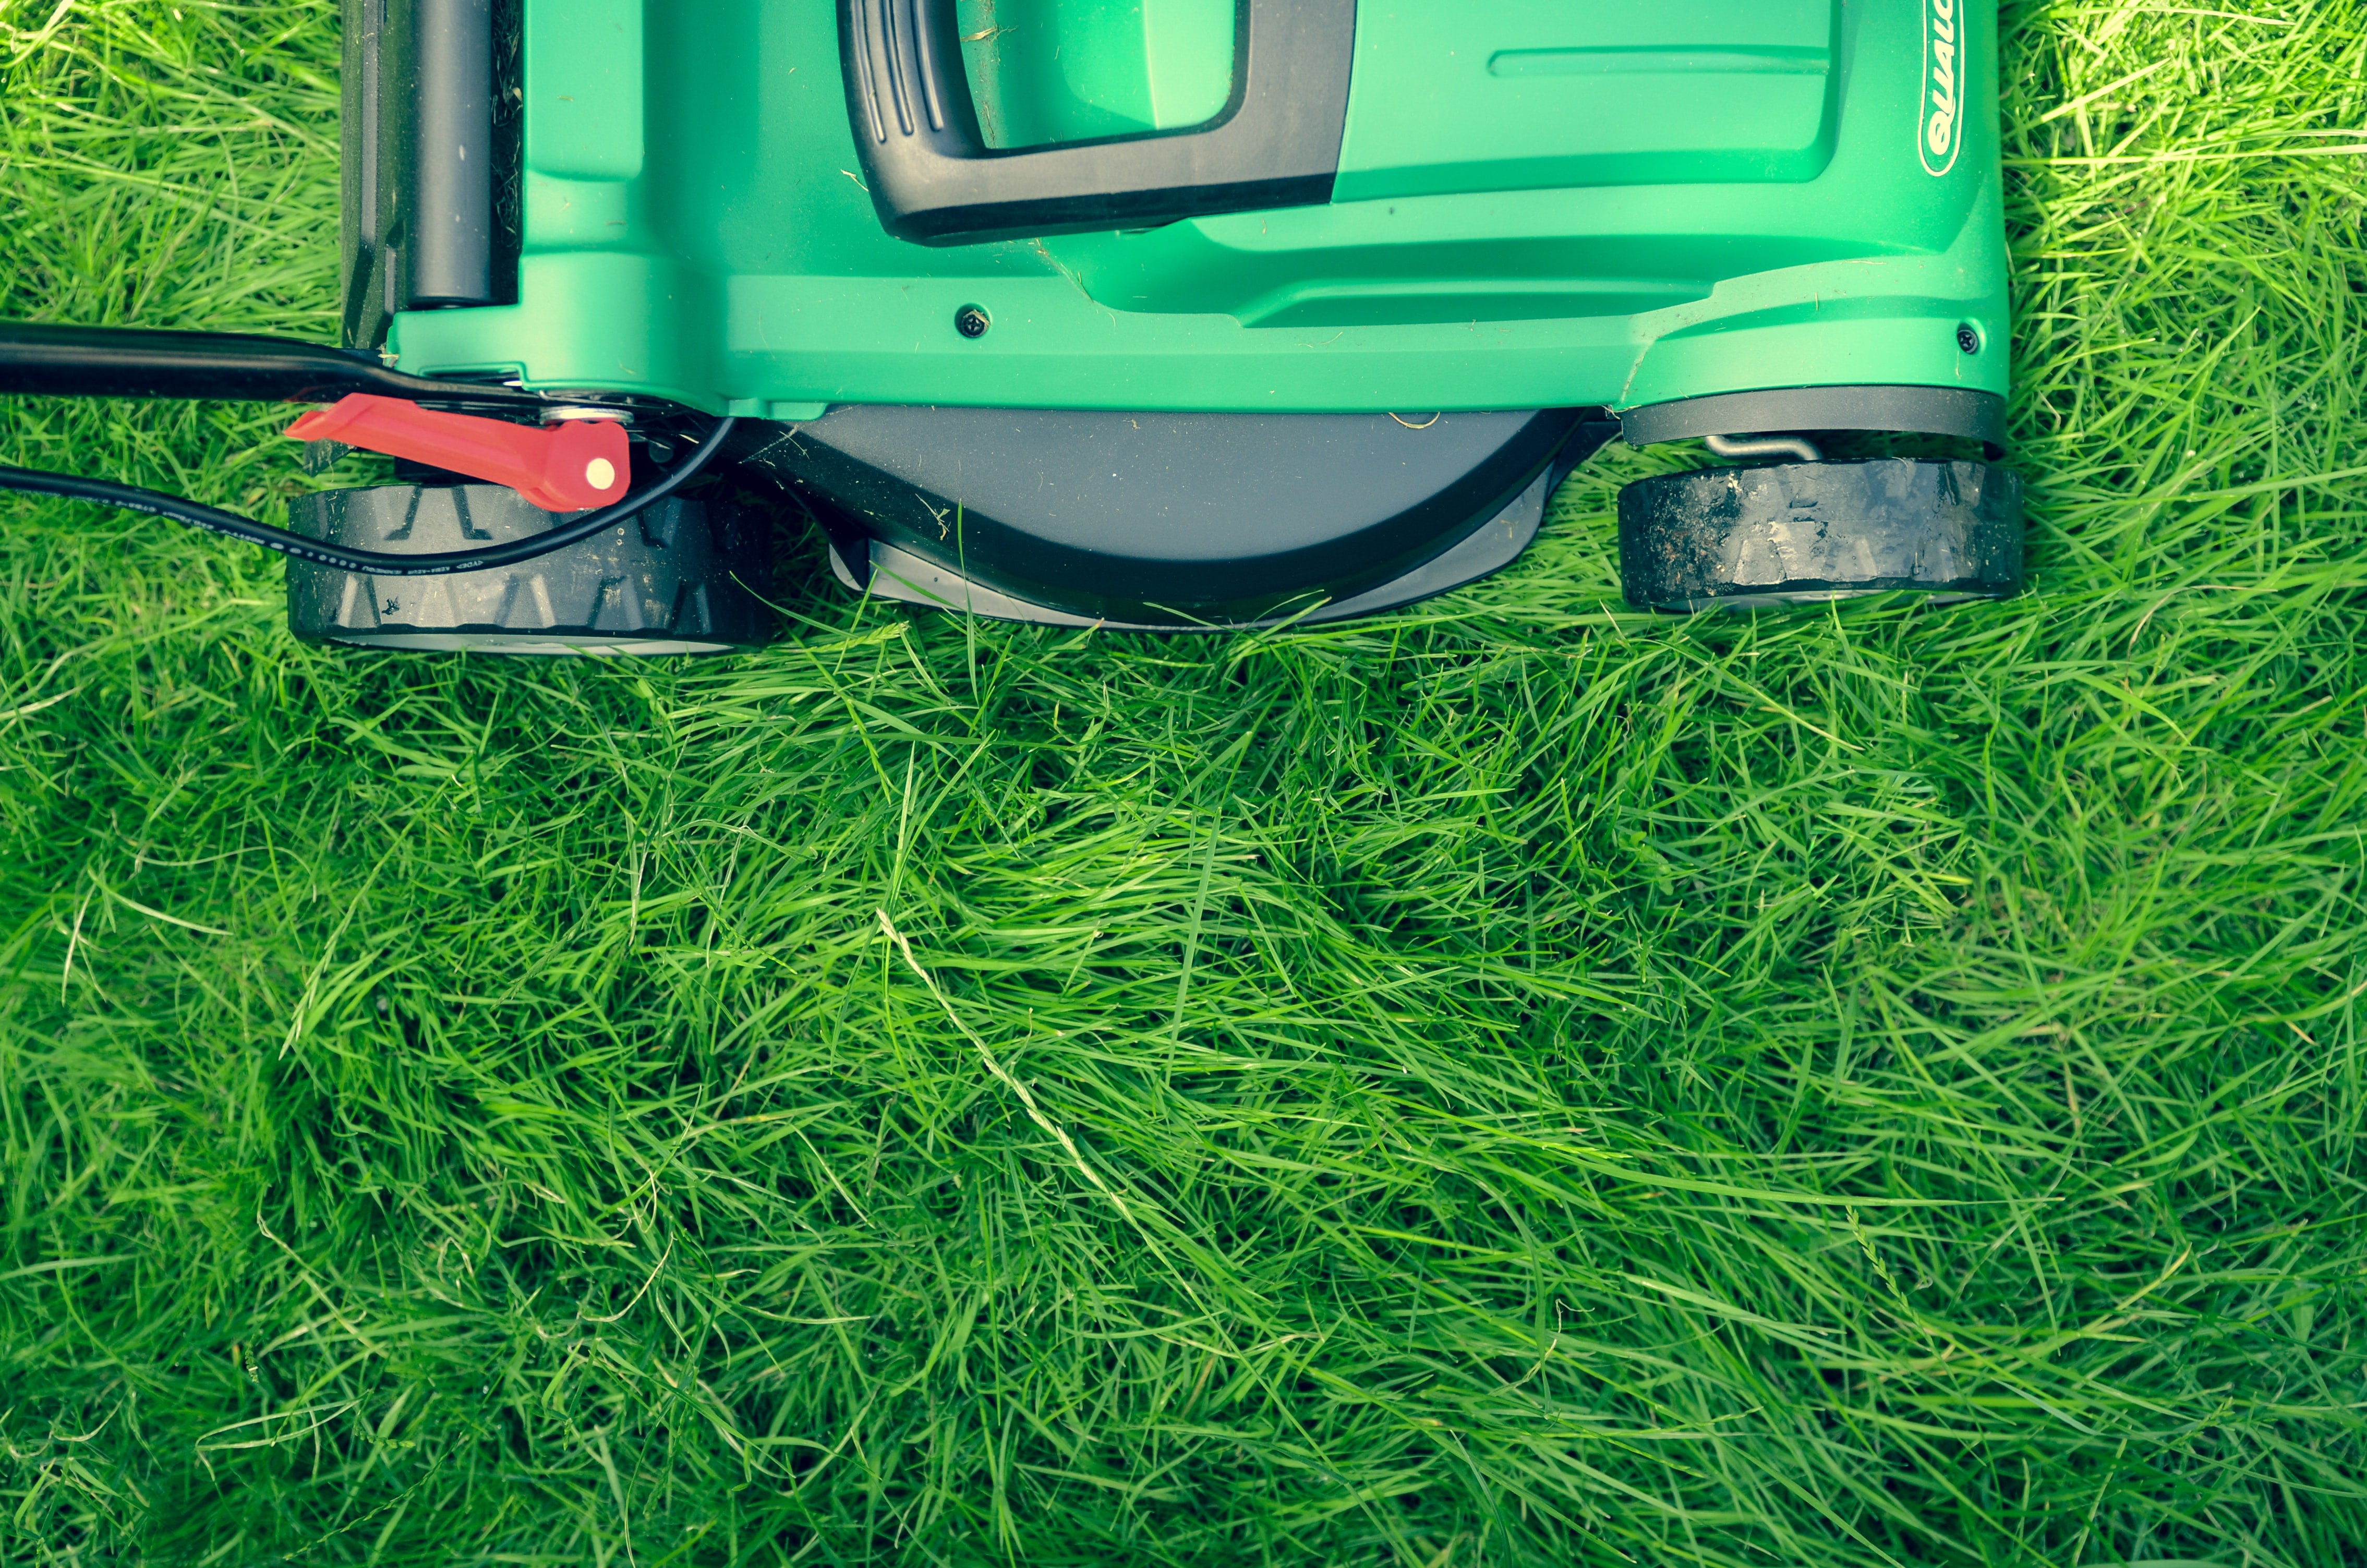 How To Sharpen Lawn Mower Blades: A Step-by-Step Guide